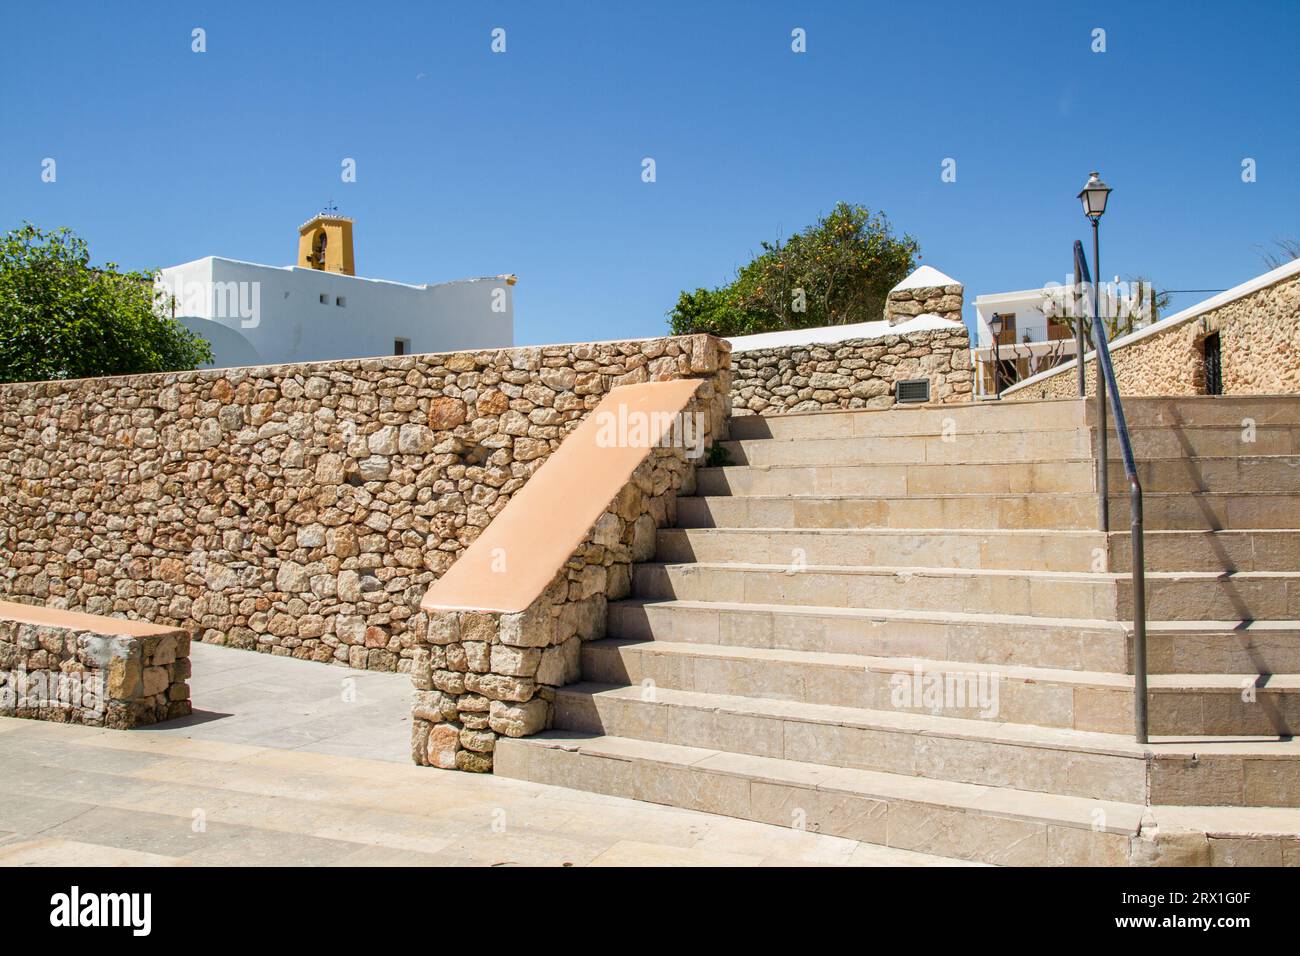 Pitoresque village Santa Gertrudis with stairs and brick wall, famous place for a daytrip at Ibiza island, Balearic islands, Spain, Europe Stock Photo